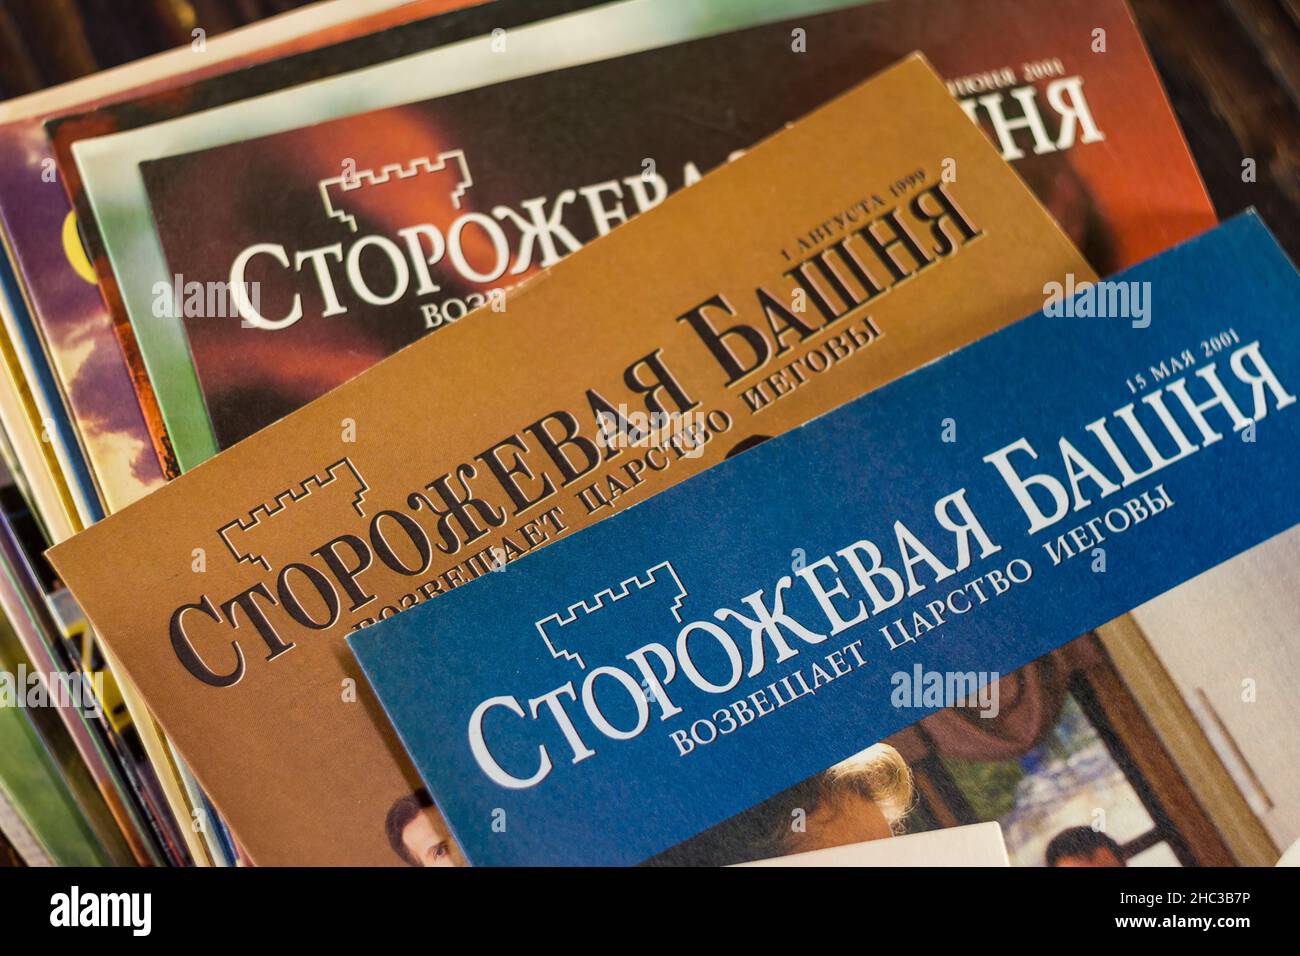 Russia - December 2020: Religious literature of Jehovah's Witnesses (organization banned in Russia). The Watchtower magazine of the early 2000s in Rus Stock Photo